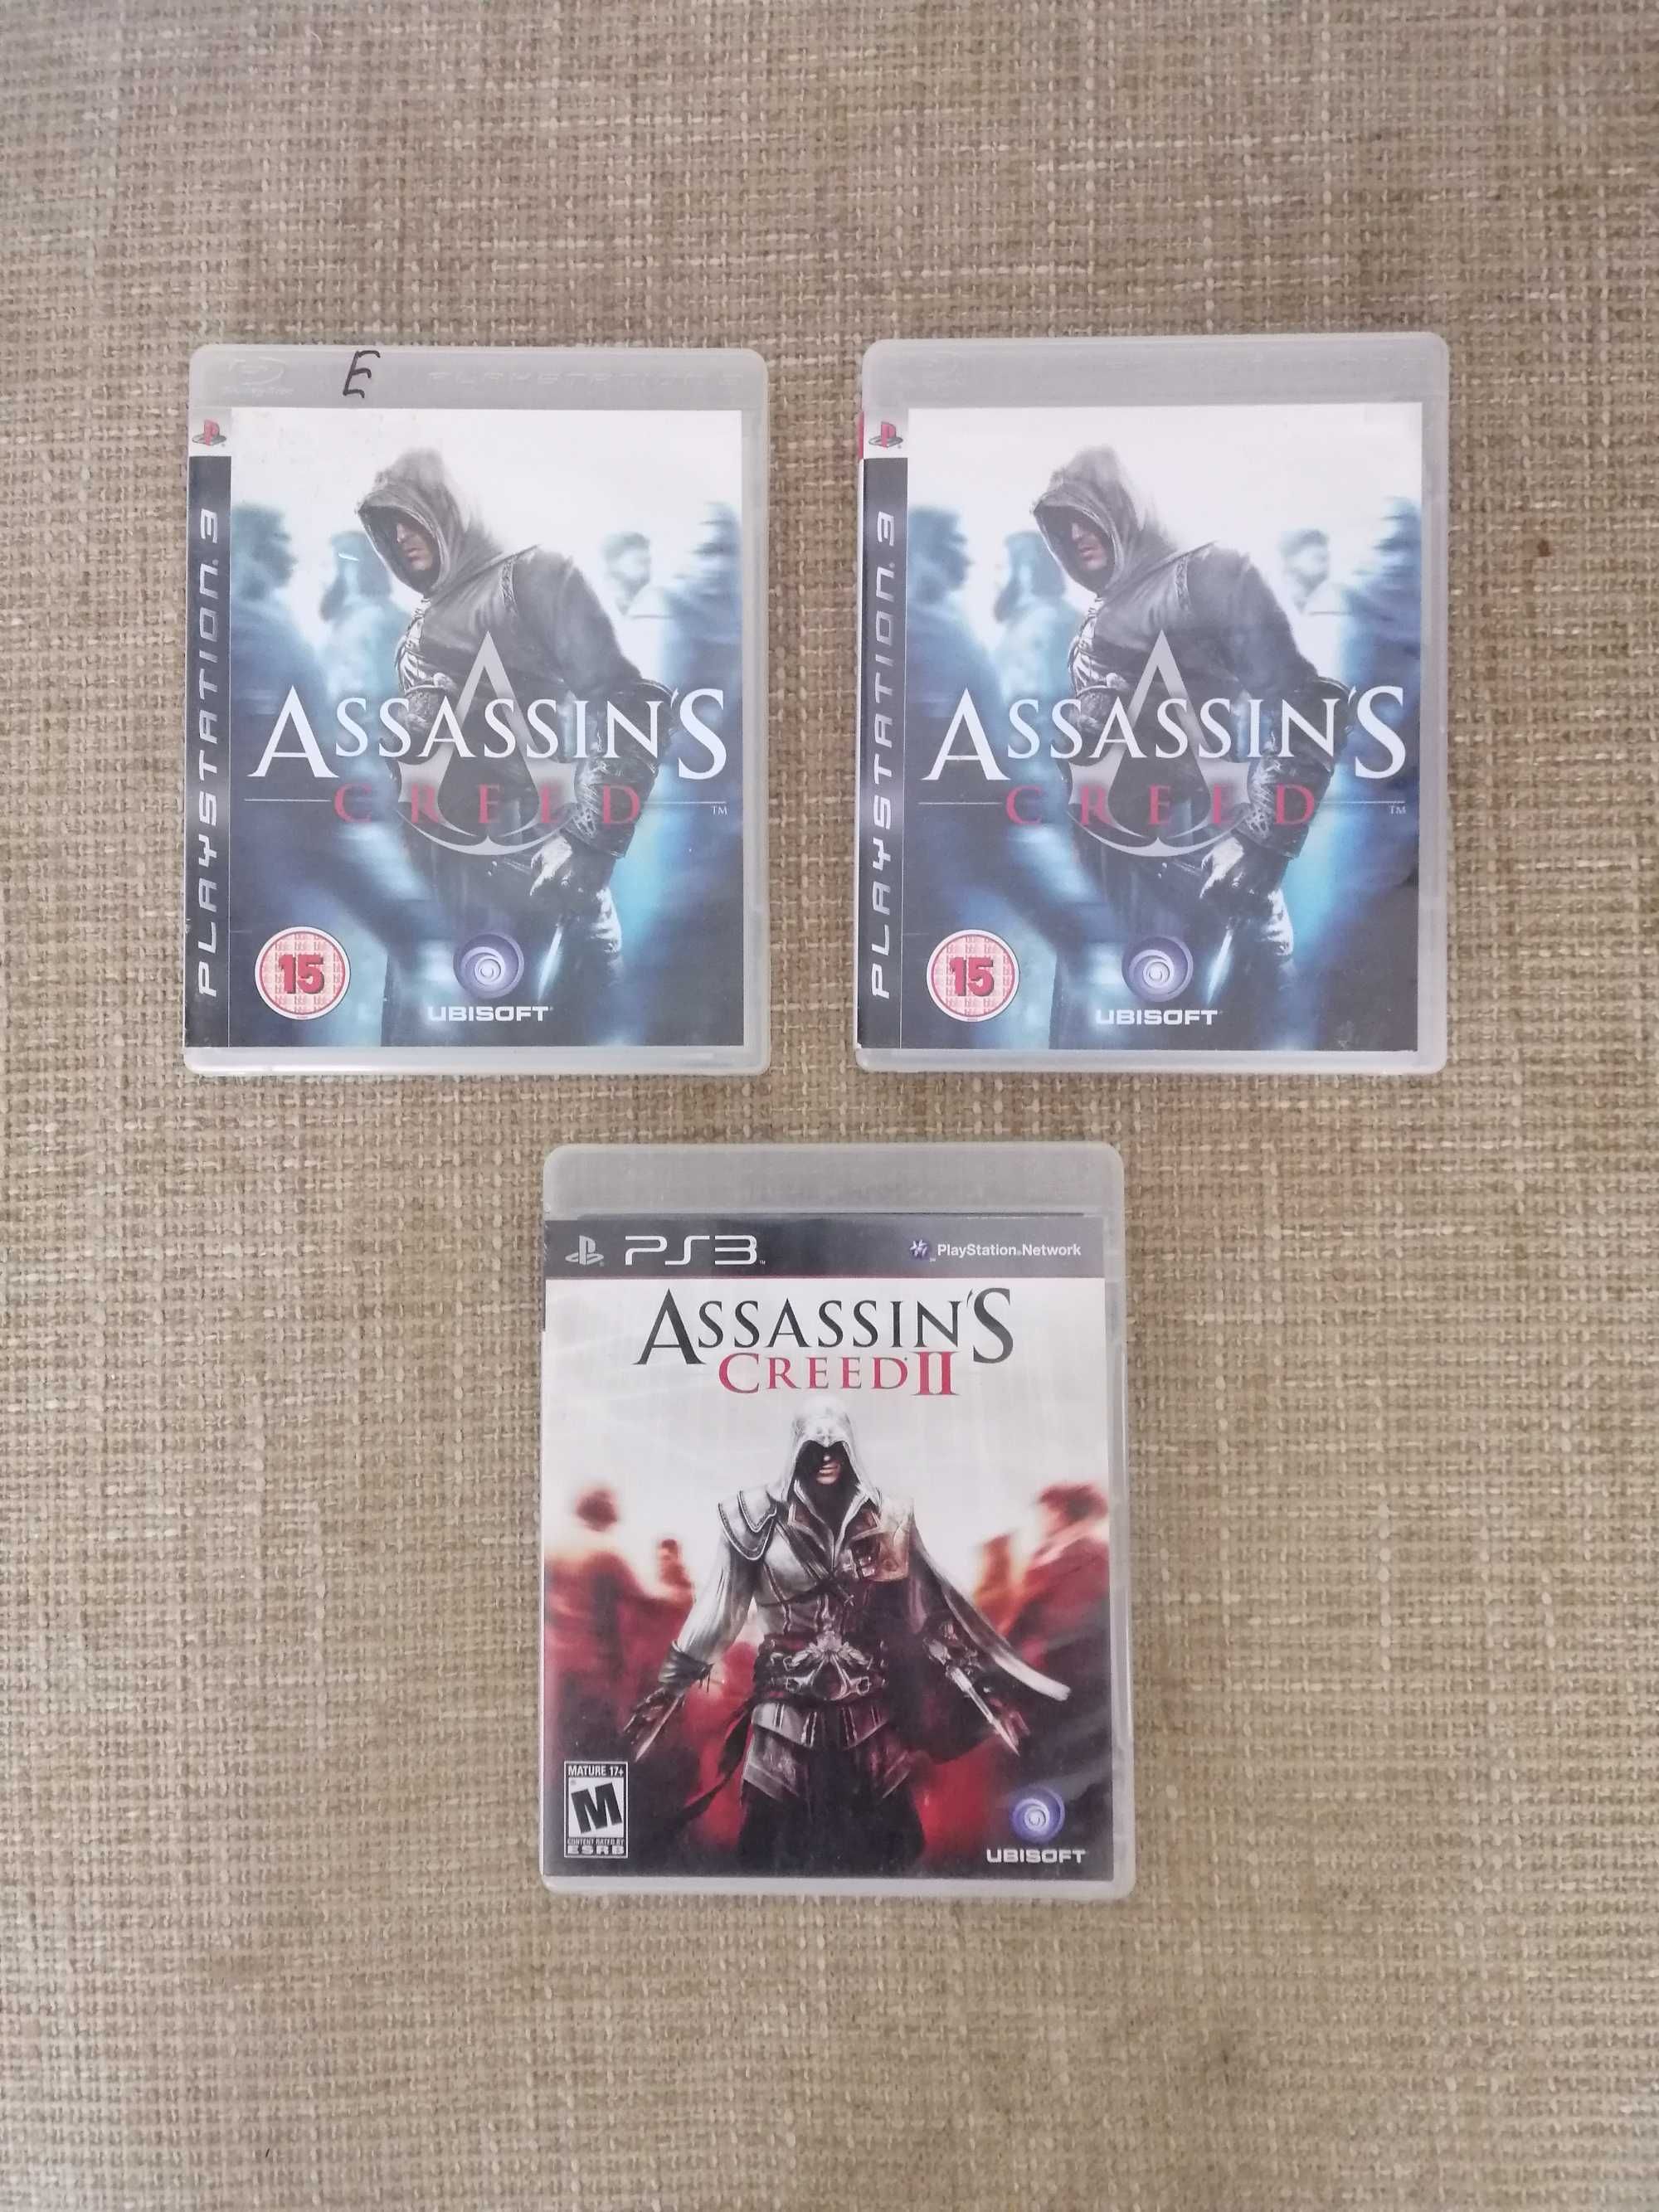 Ігри для PS3 / PlayStation 3 (Assassin's Creed, Assassin's Creed 2)